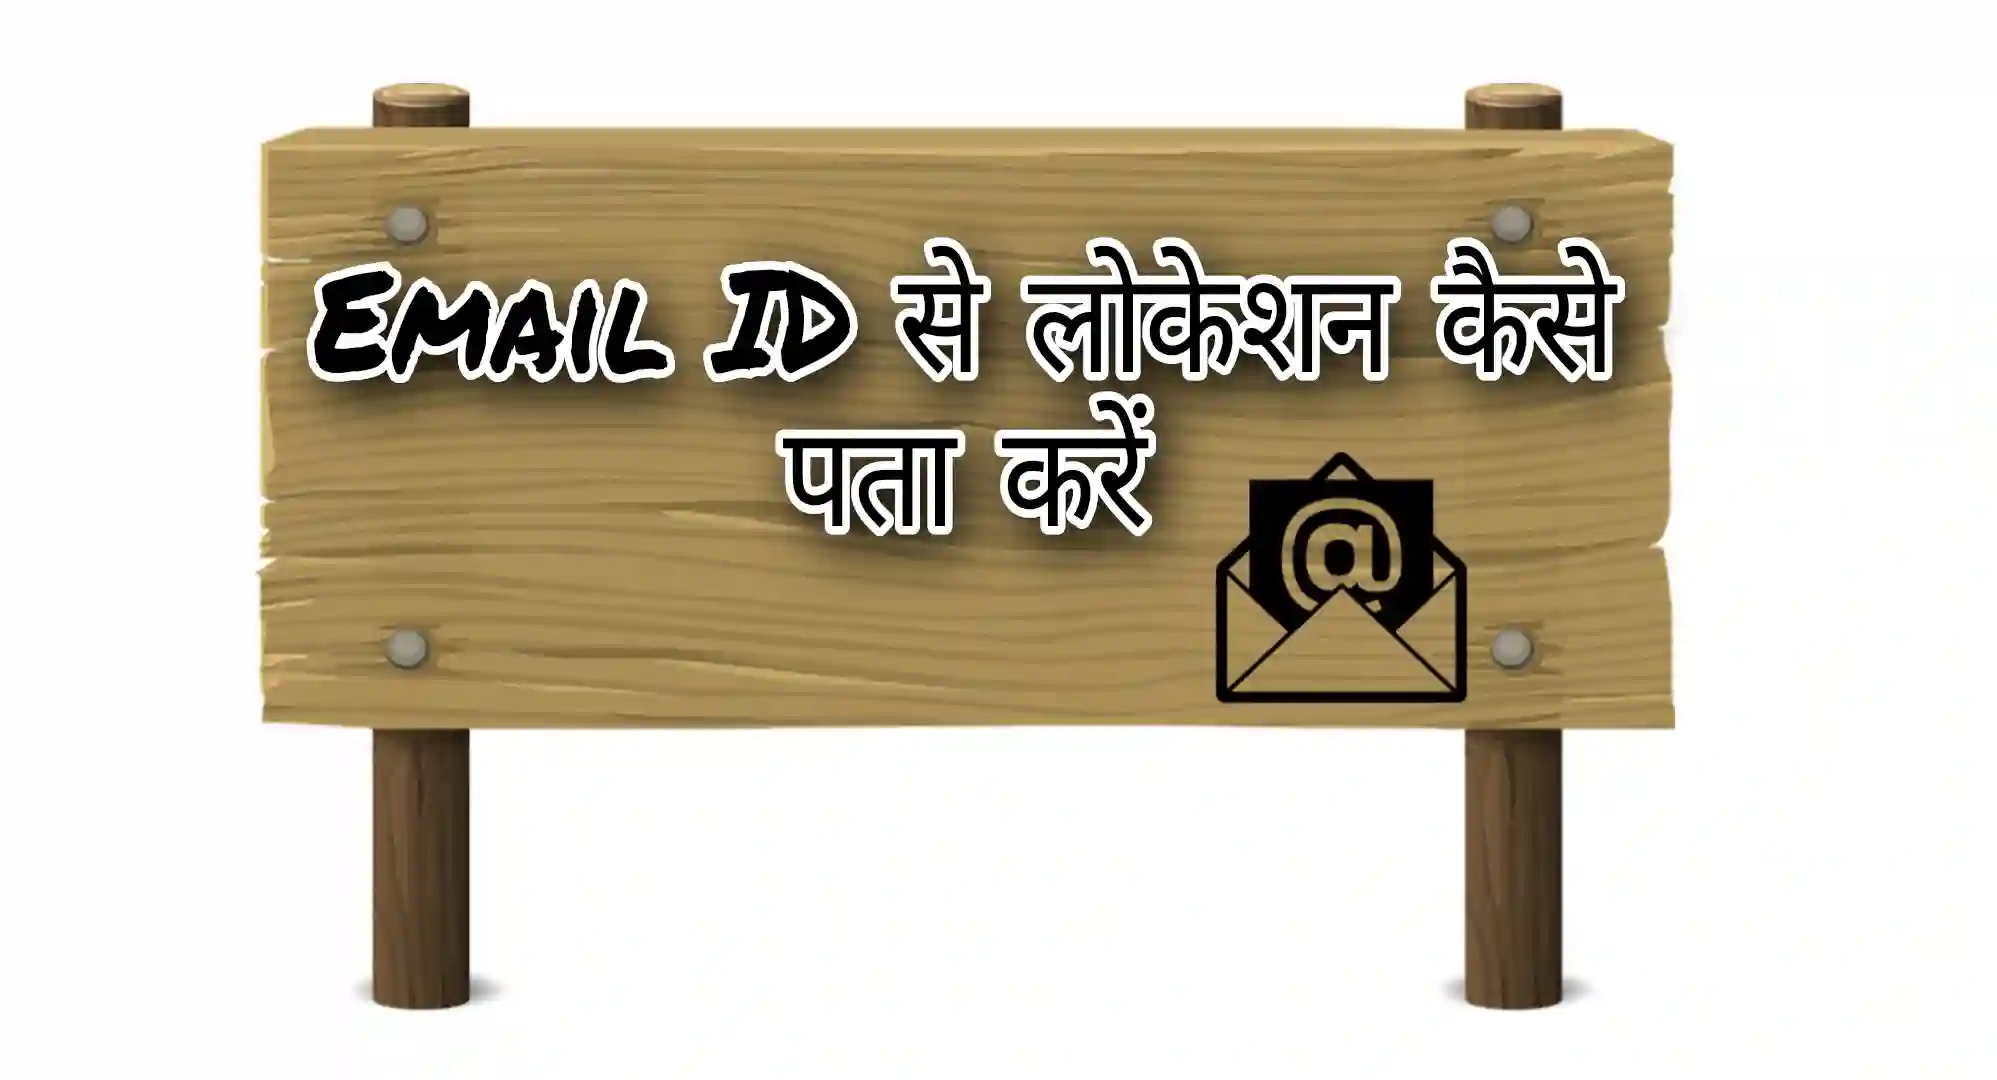 Email-id-se-location-kaise-pata-kare